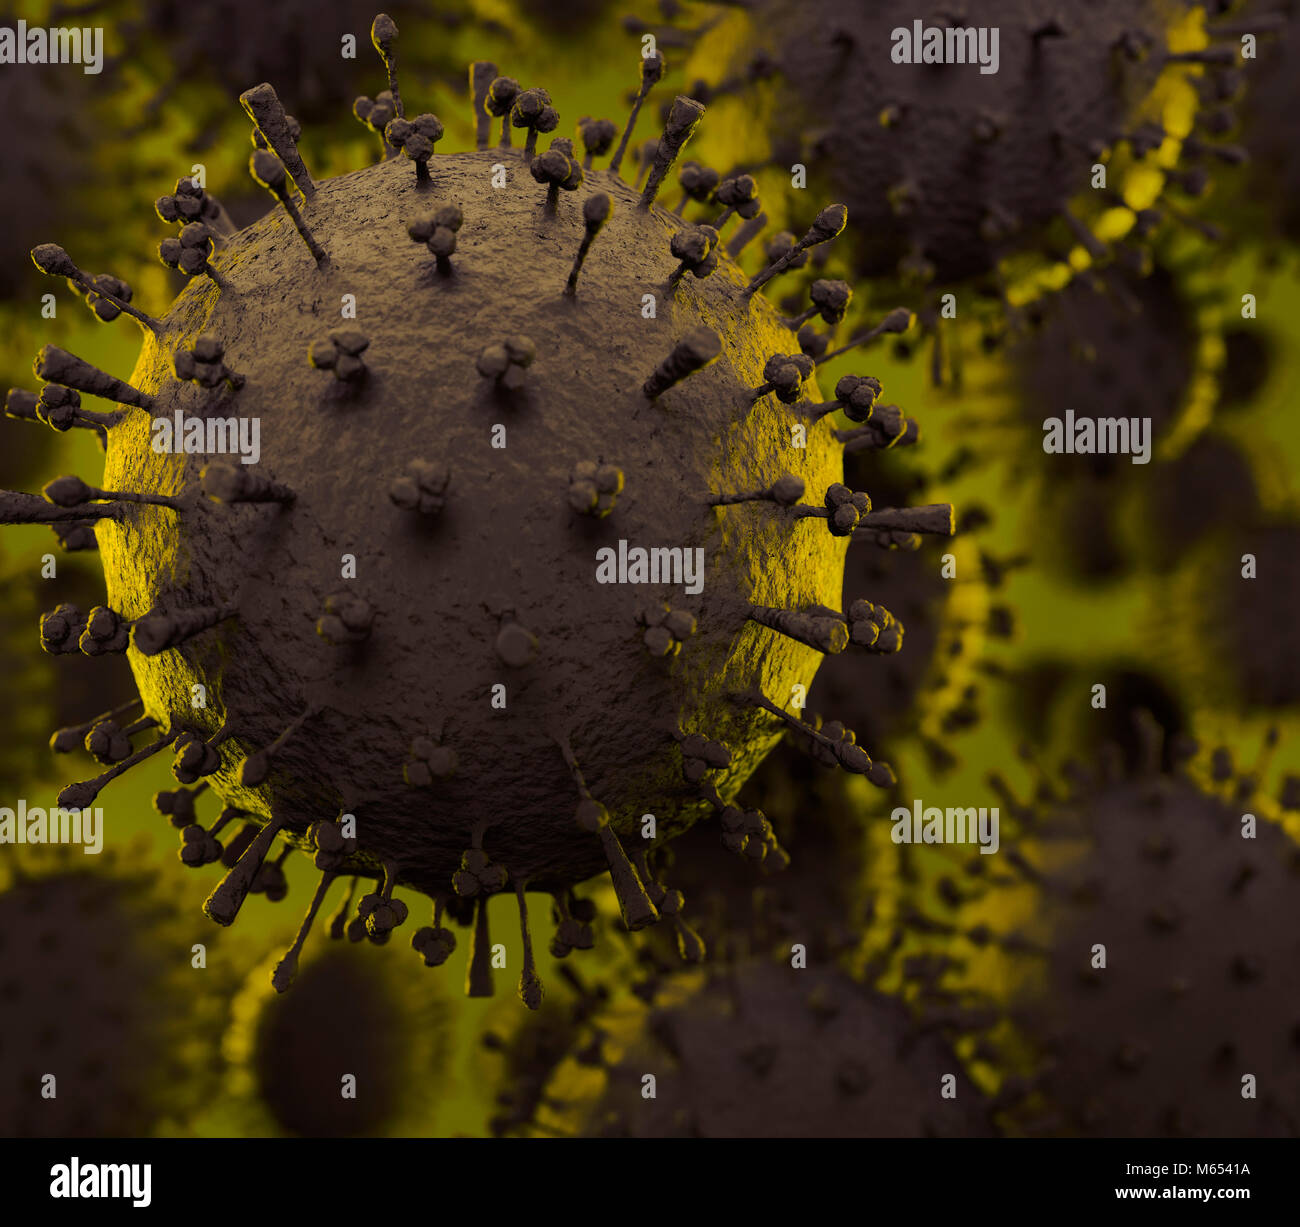 Flu virus H1N1, H5N1, influenza A virus particles - virions under a microscope. Scientific illustration of a spreading virus, epidemic concept. Stock Photo